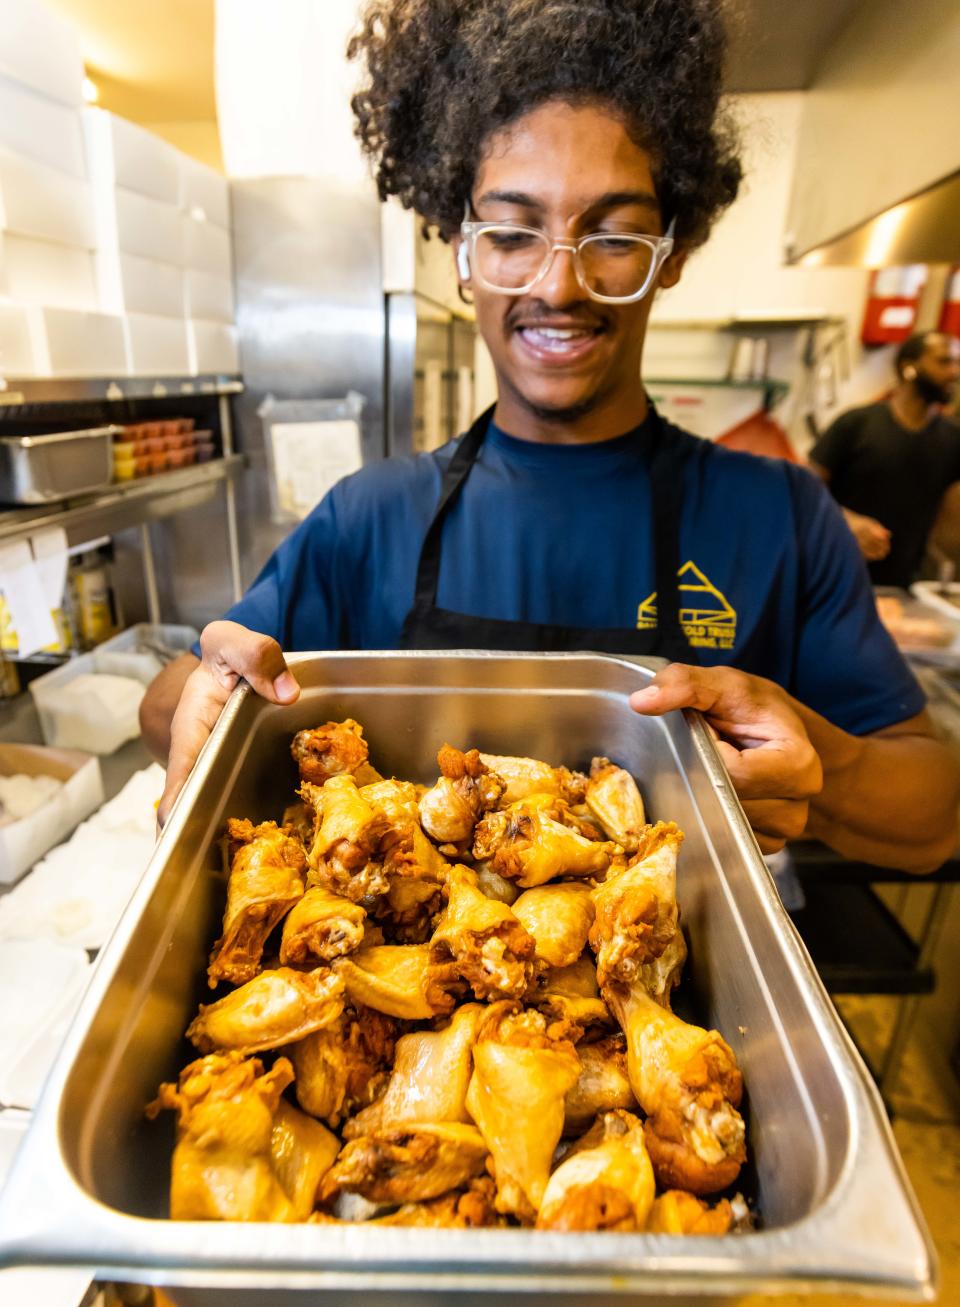 Crunchies & Munchies employee Michael Scott carries a full tray of freshly deep fried wings on July 14.